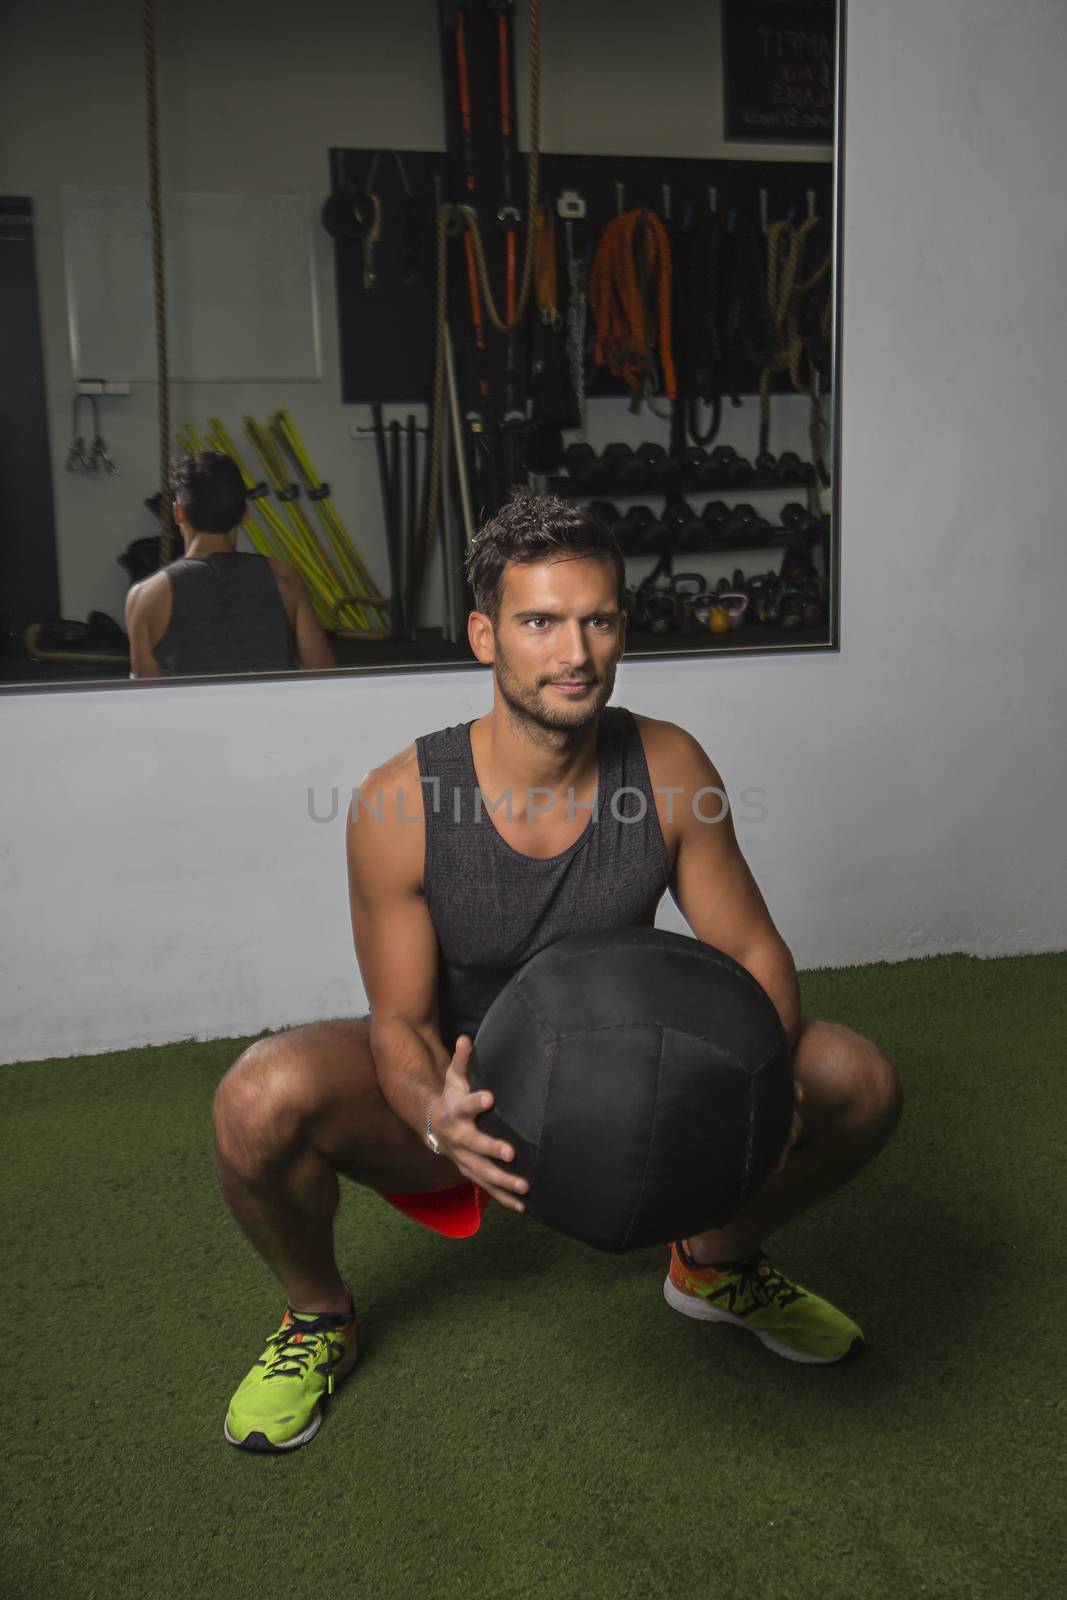 young man holding a large medicine ball, doing a squat